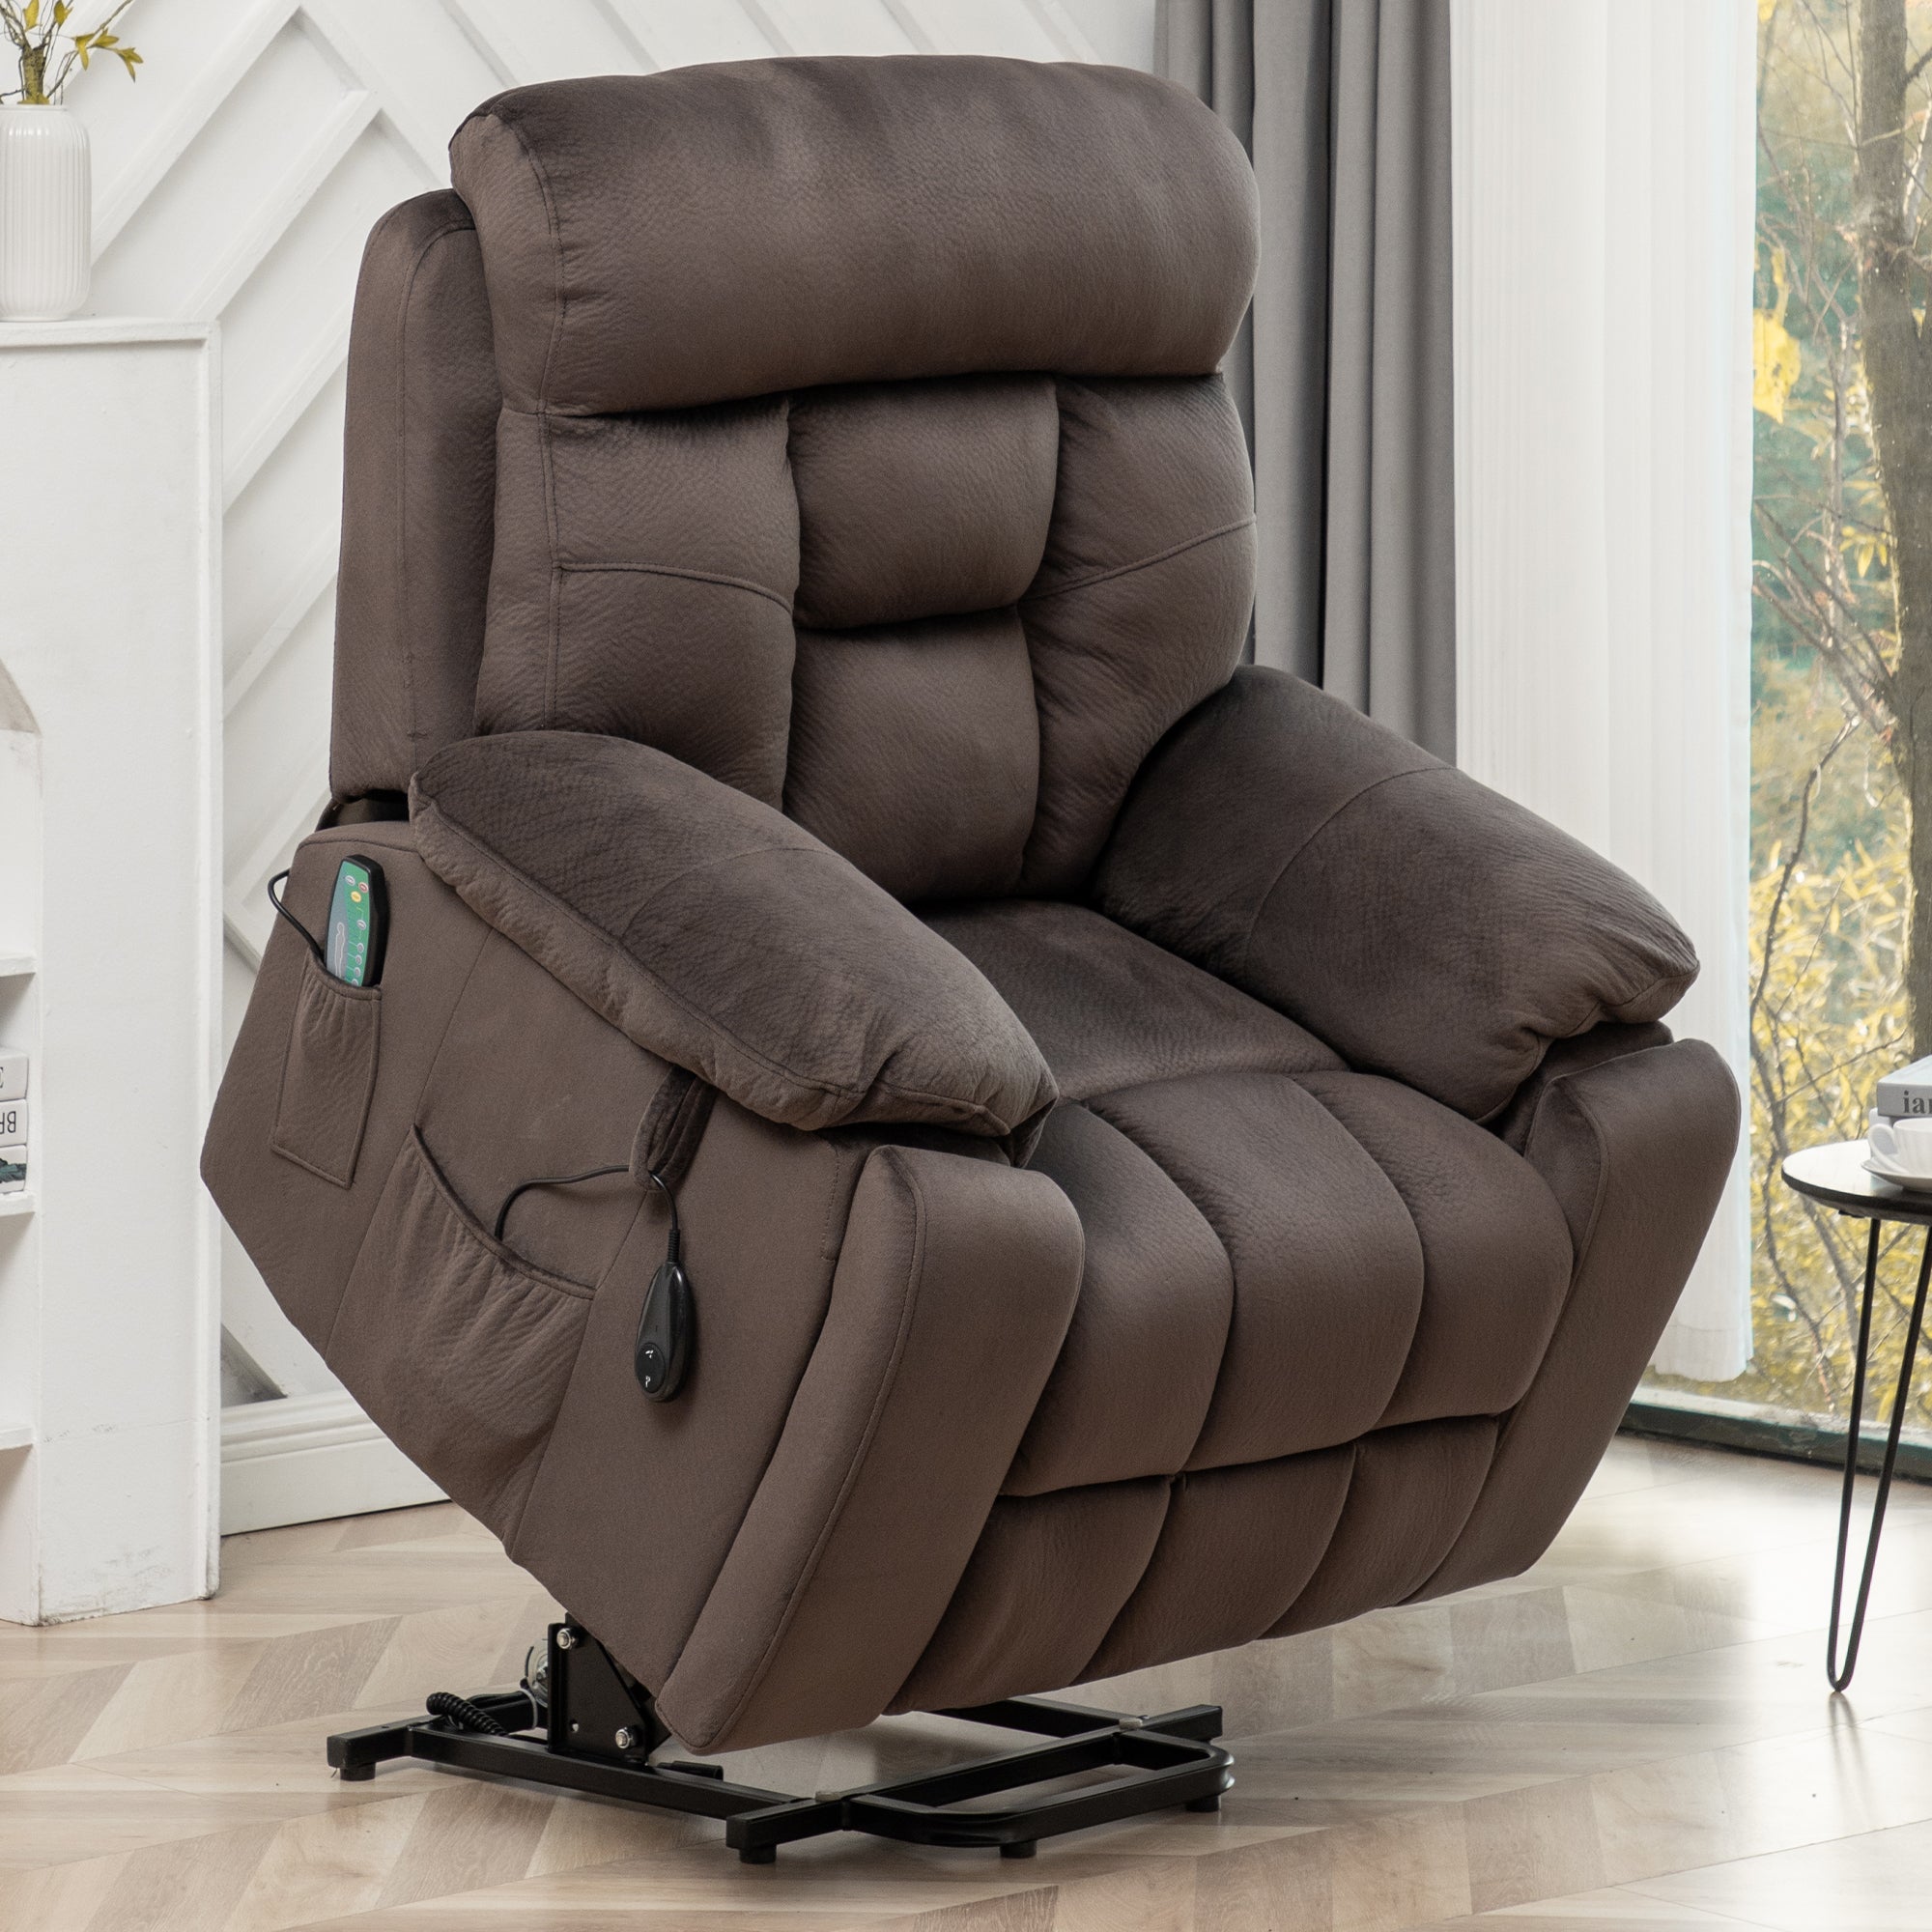 uhomepro Massage Recliner Chair, Electric Heated Power Lift Recliner Chairs  for Adults, Recliner Sofa for Seniors 330 lb Capacity with 5 Vibration